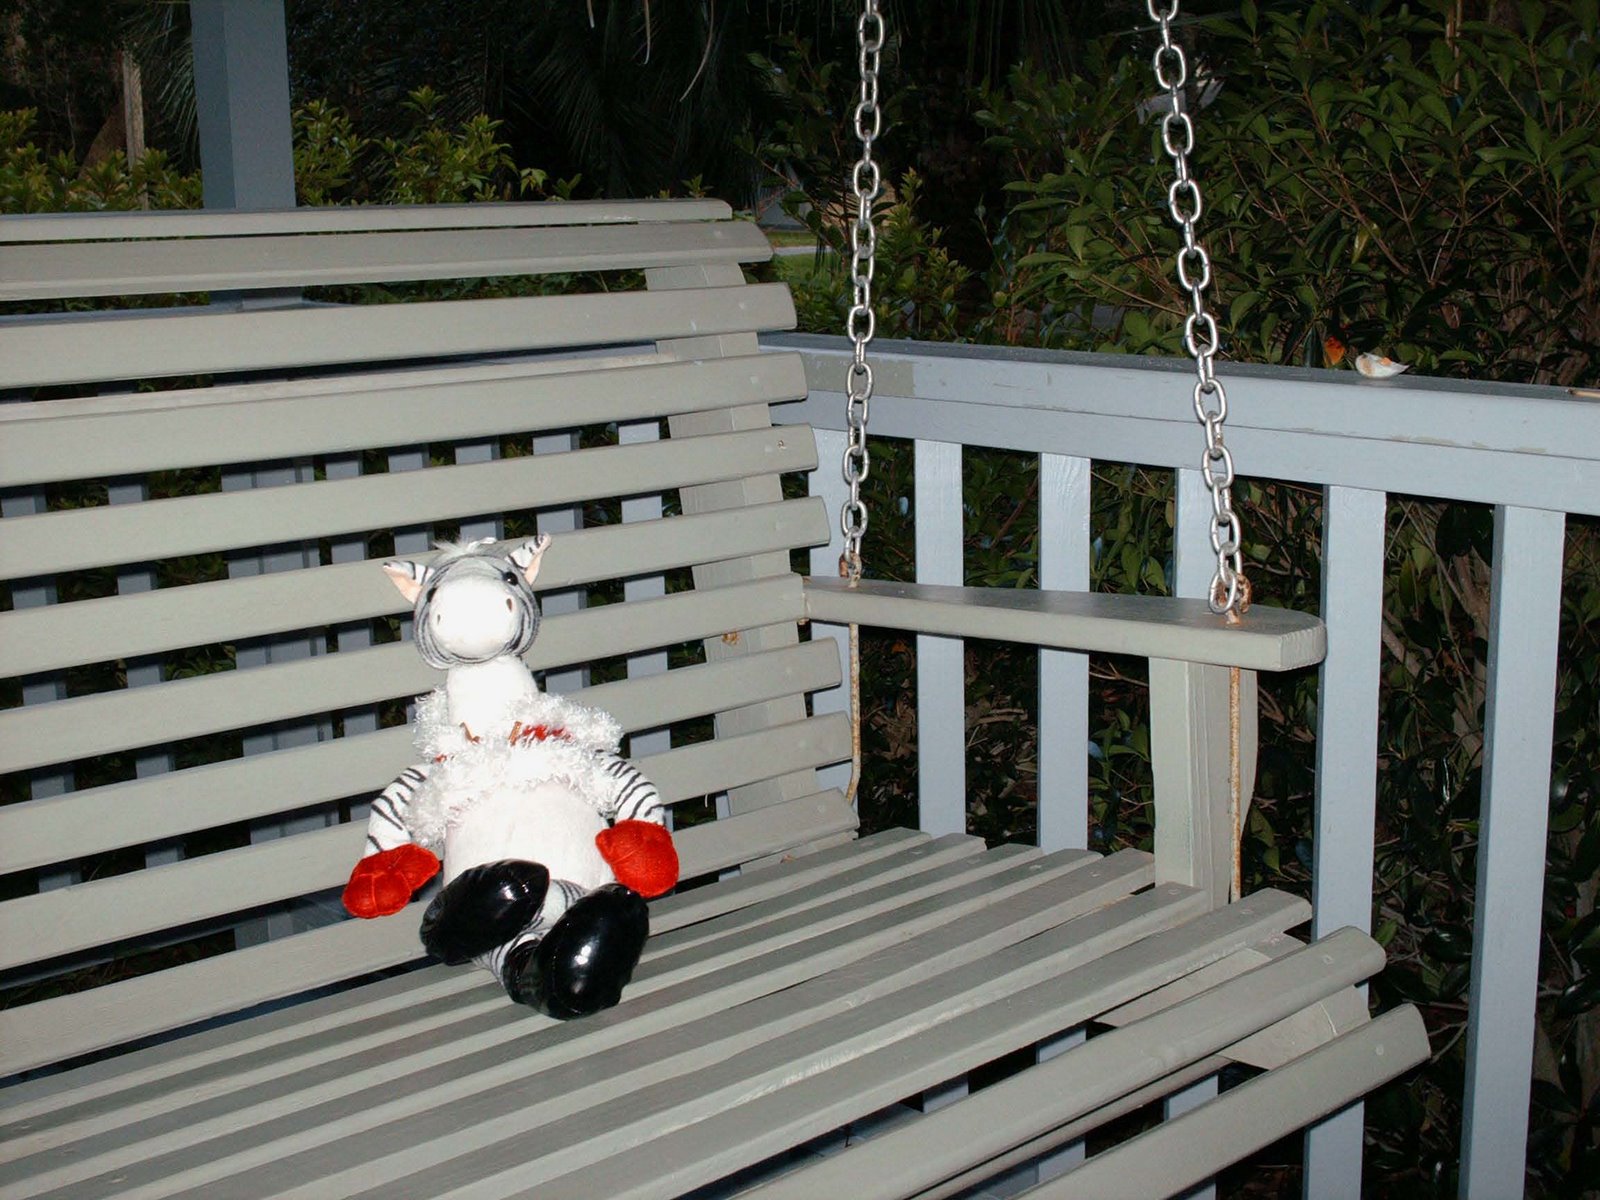 [Zippy+relaxes+on+the+porch+swing-1.jpg]